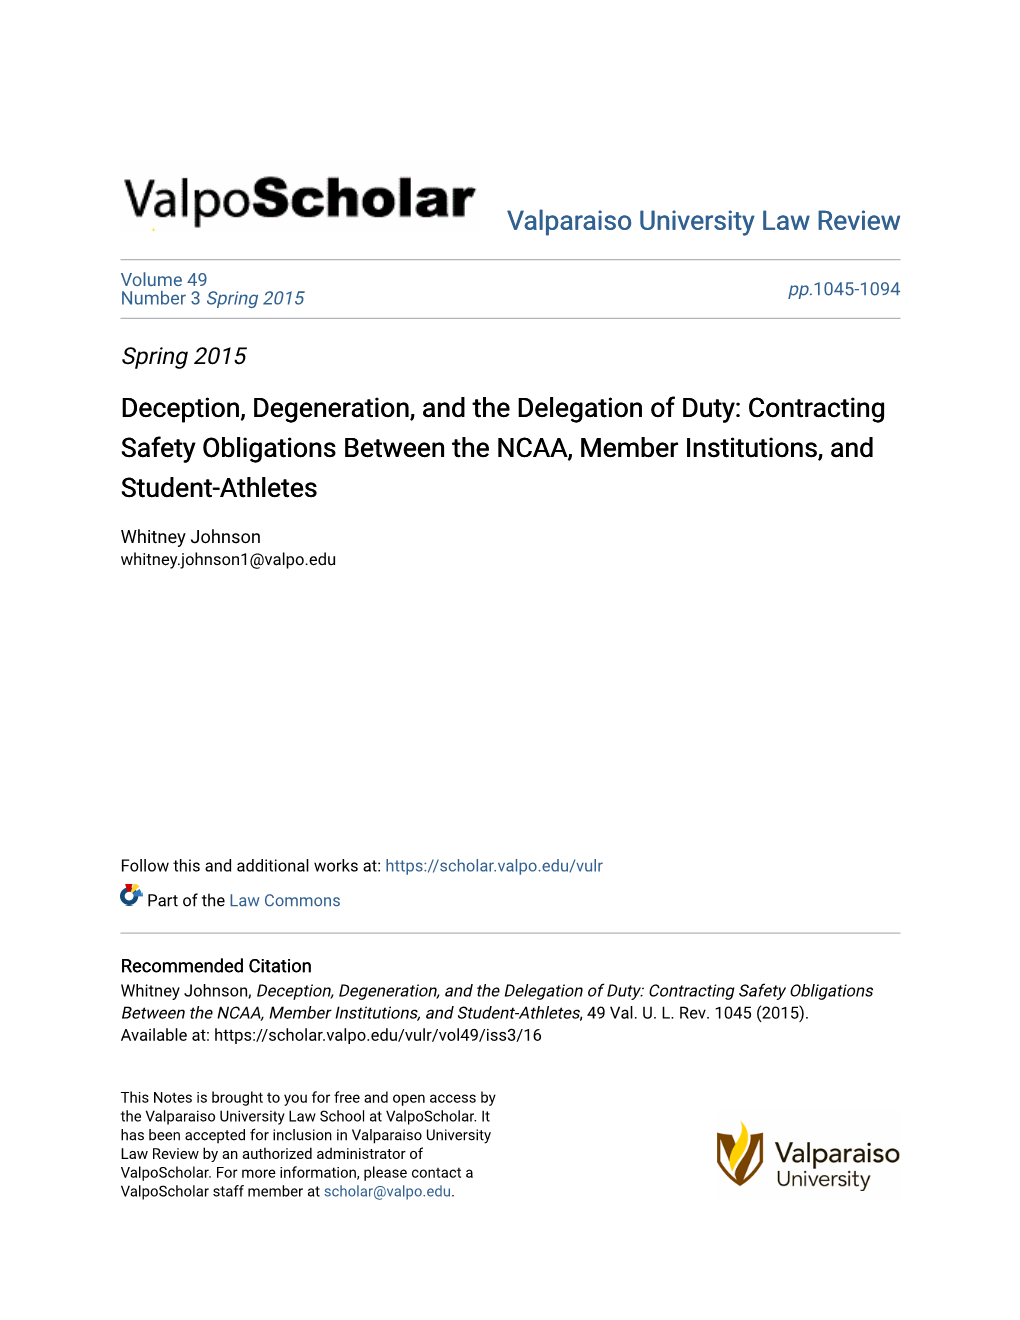 Contracting Safety Obligations Between the NCAA, Member Institutions, and Student-Athletes